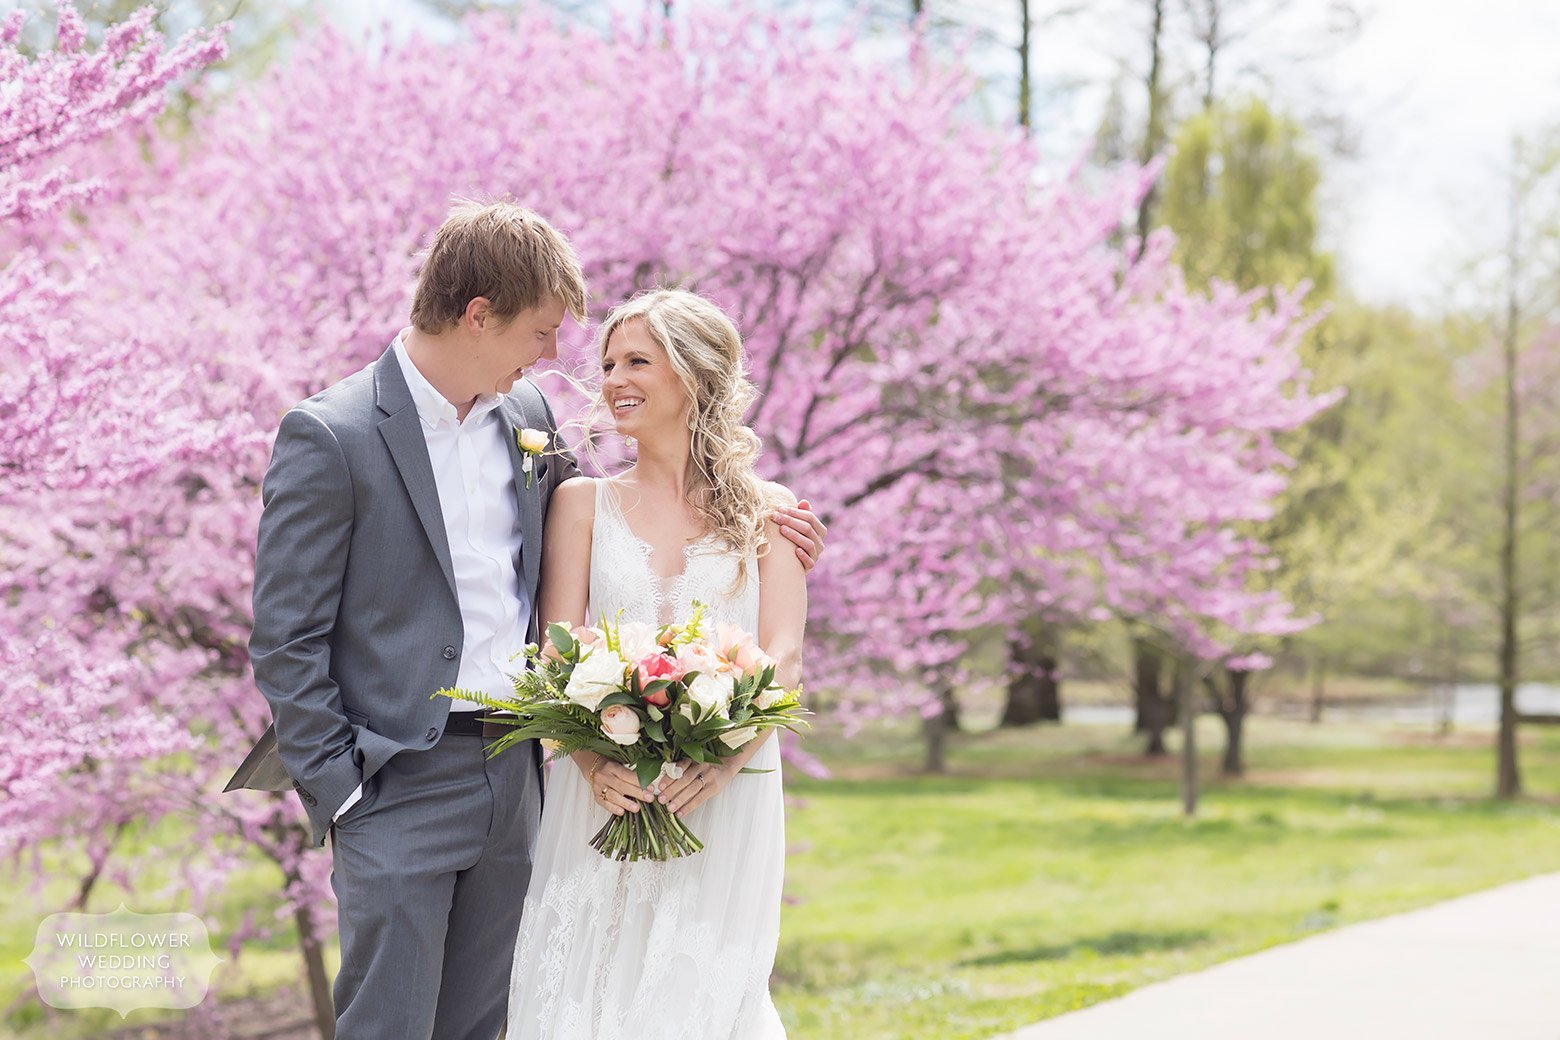 Bride and groom pose in front of rosebud trees in Forest Park for their spring wedding.